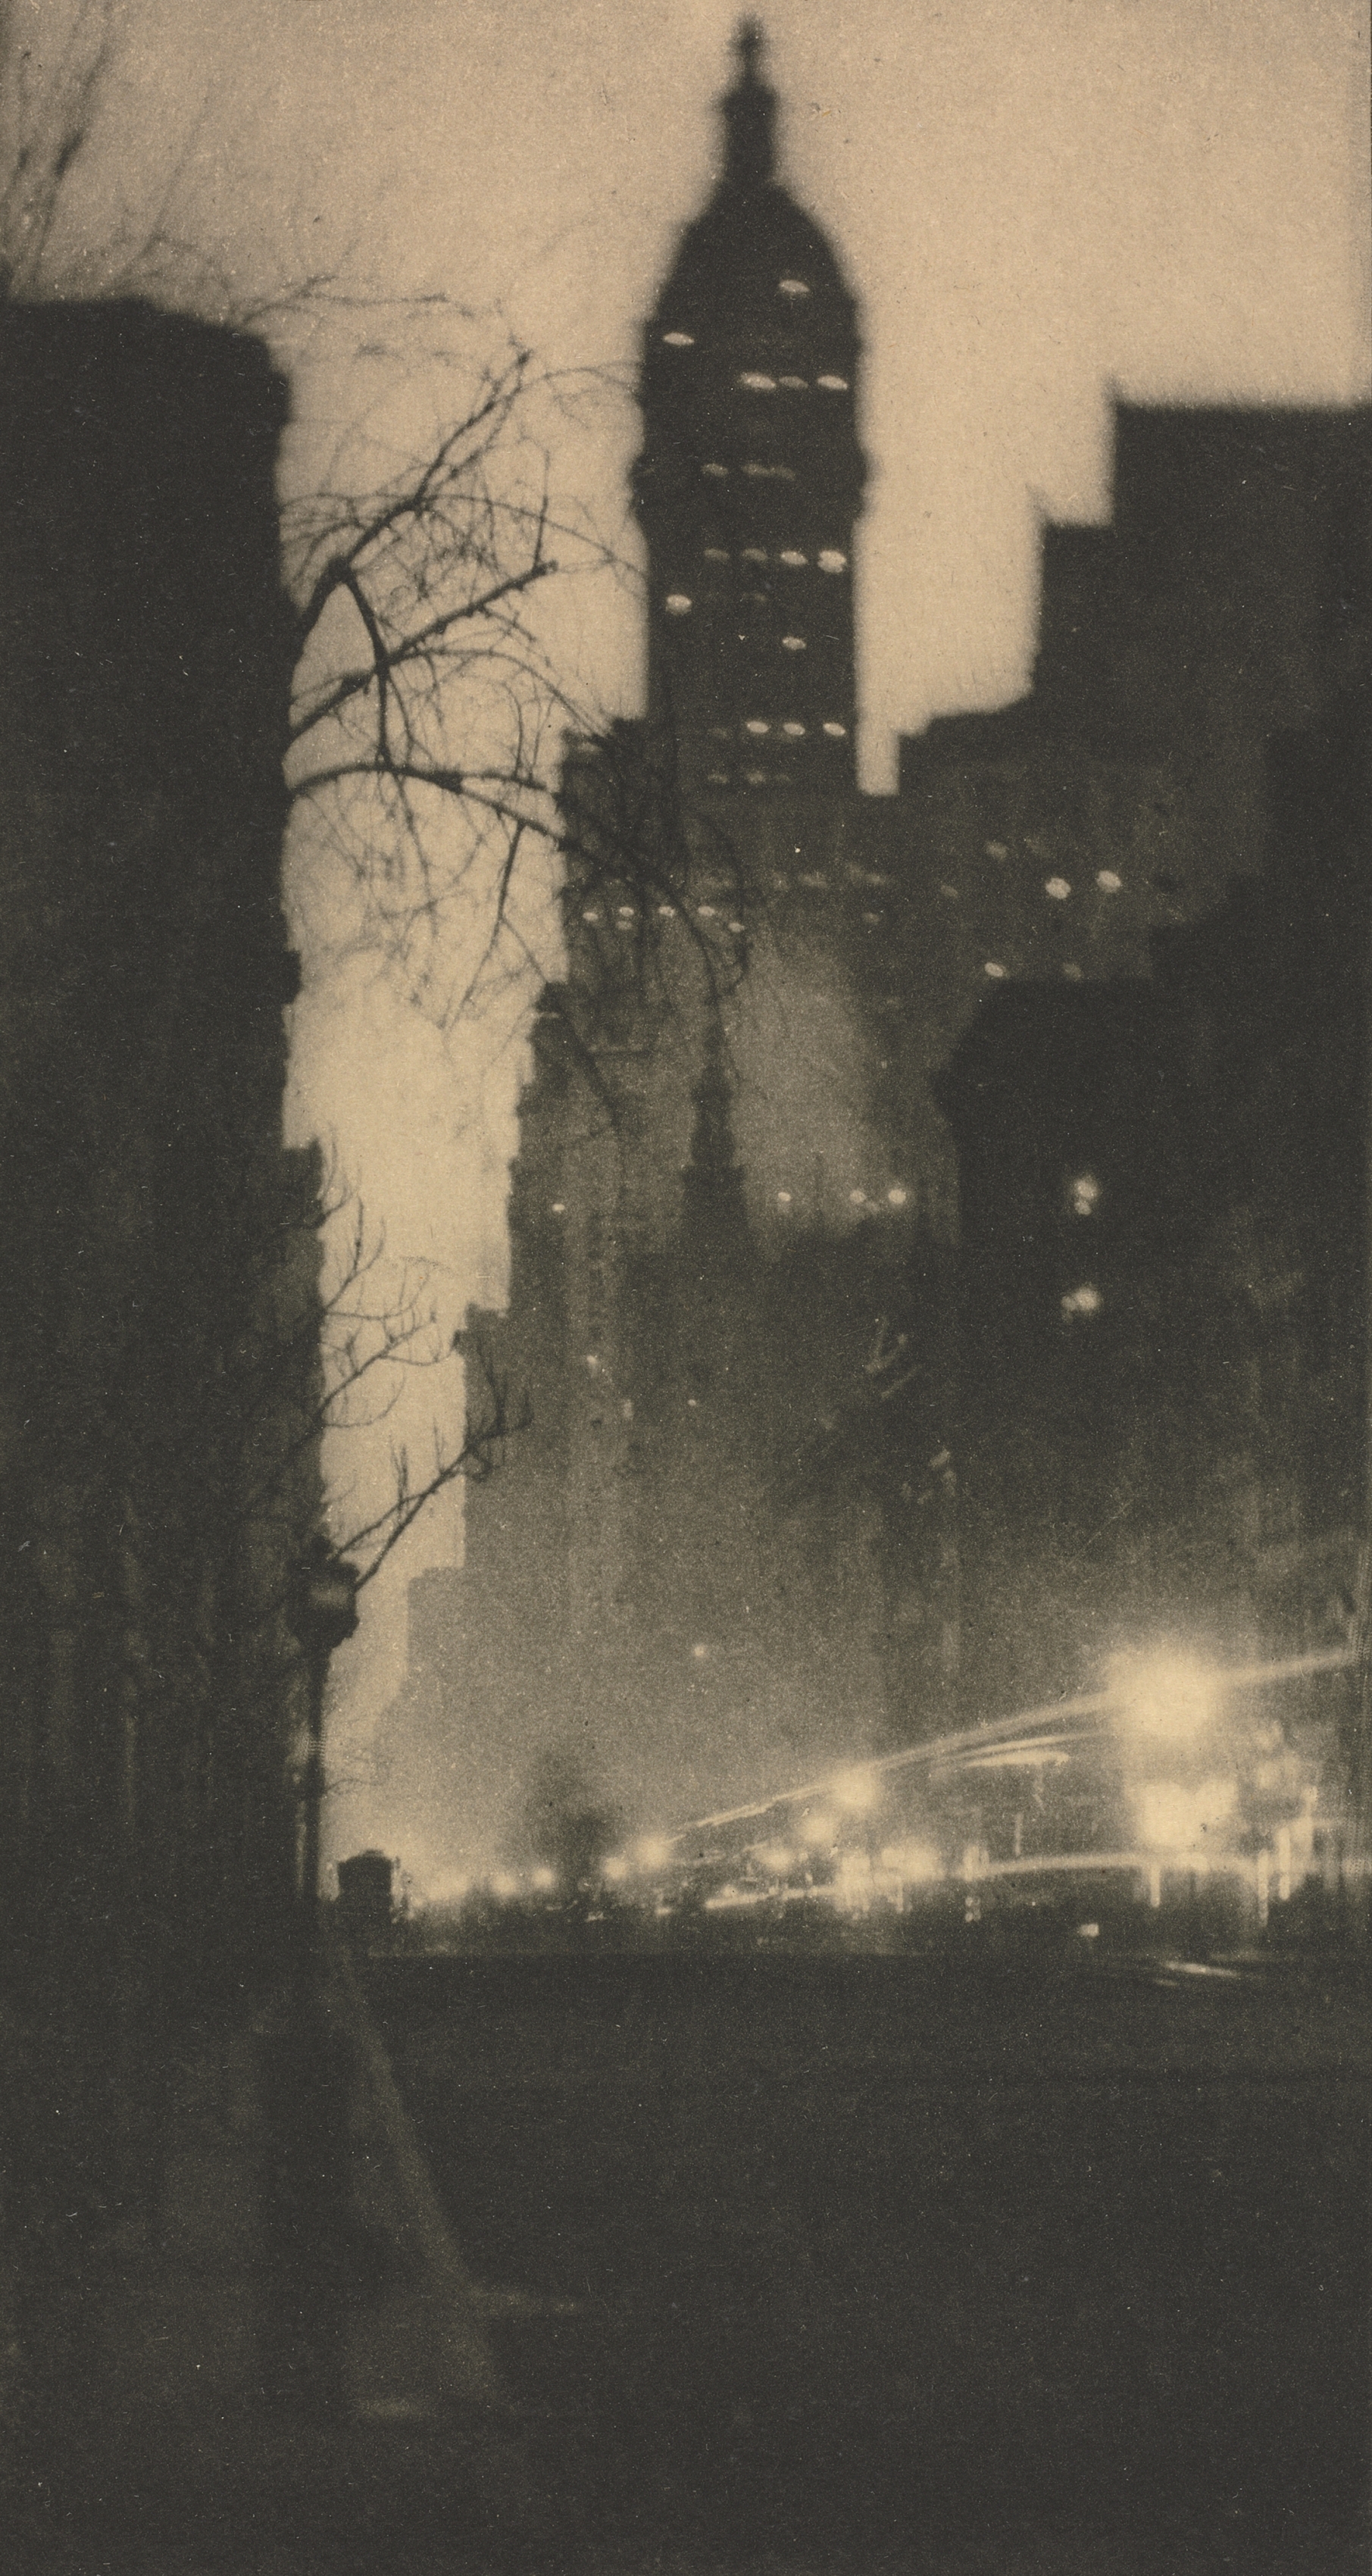 Camera Work: Broadway and the Singer Building by Night (advertisement for Coburn's, New York)